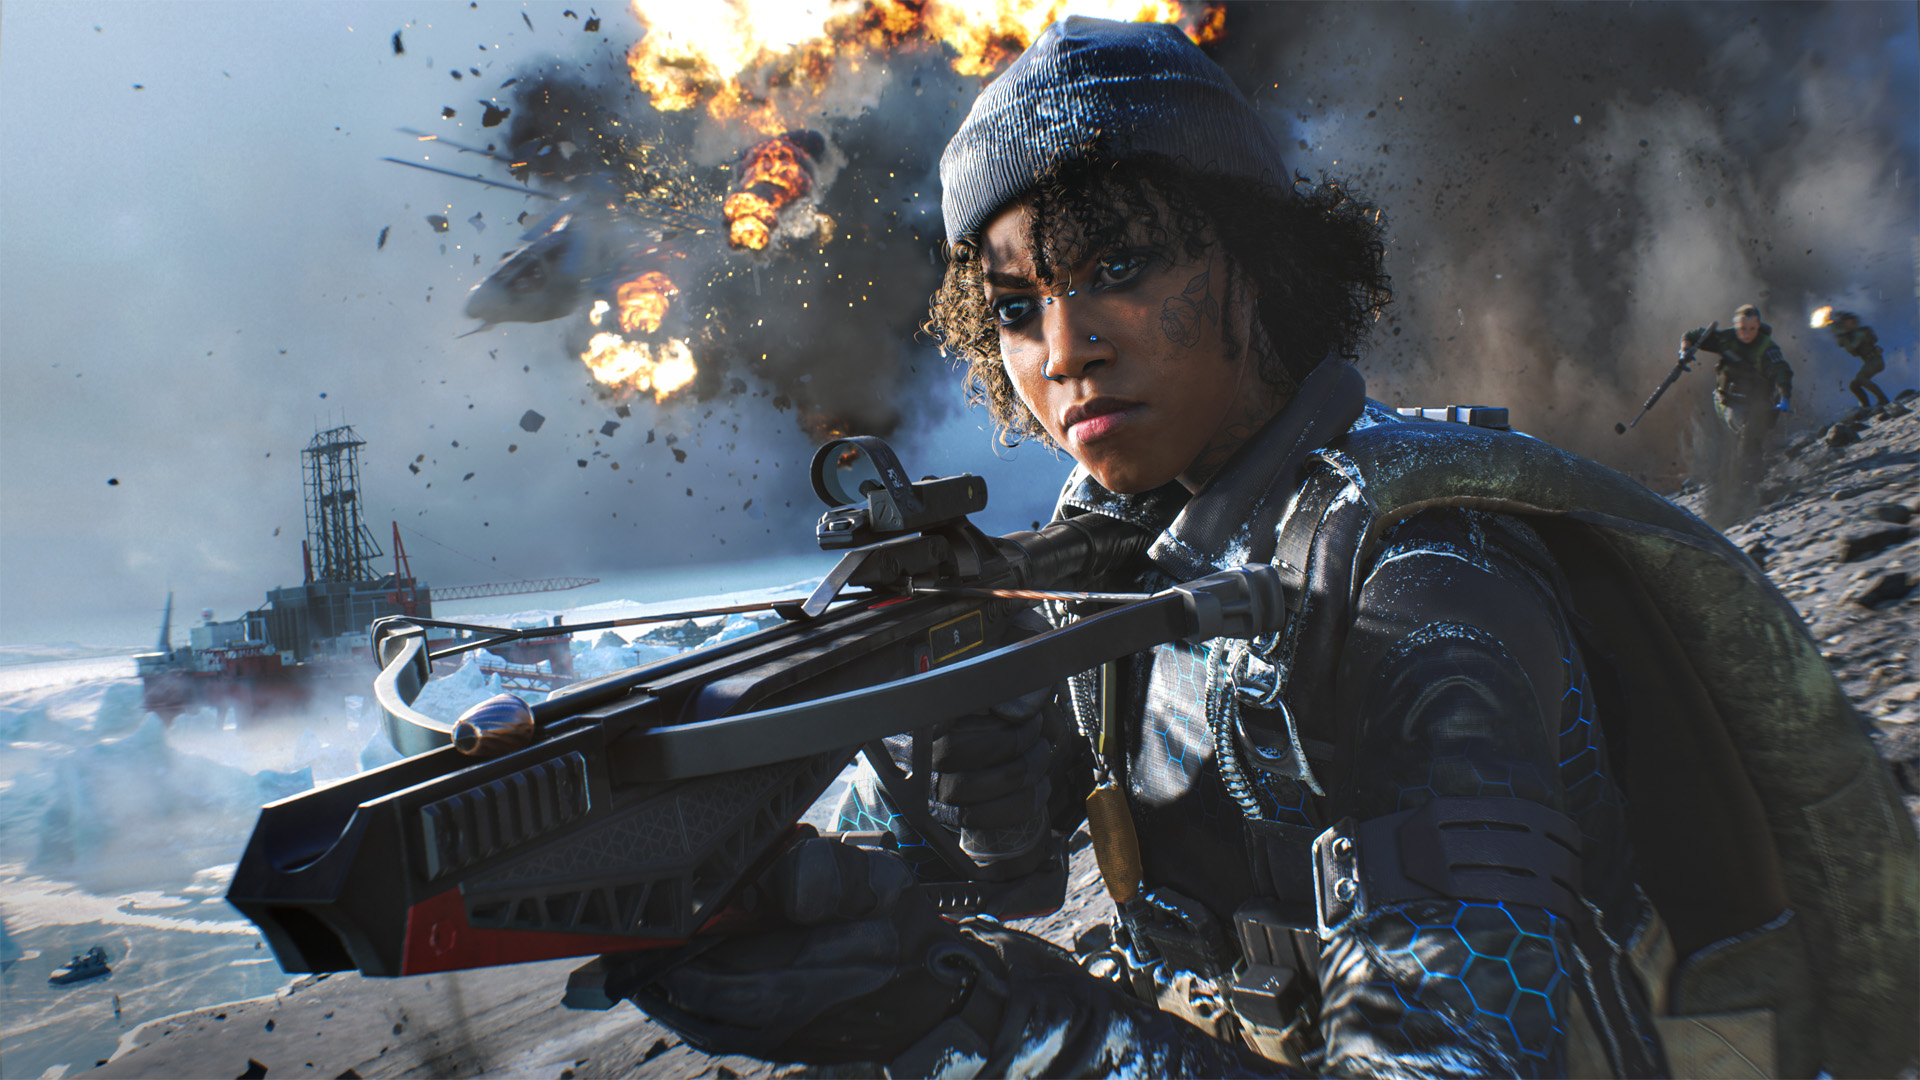 Battlefield "cannot keep up" as a Call of Duty competitor, says Sony